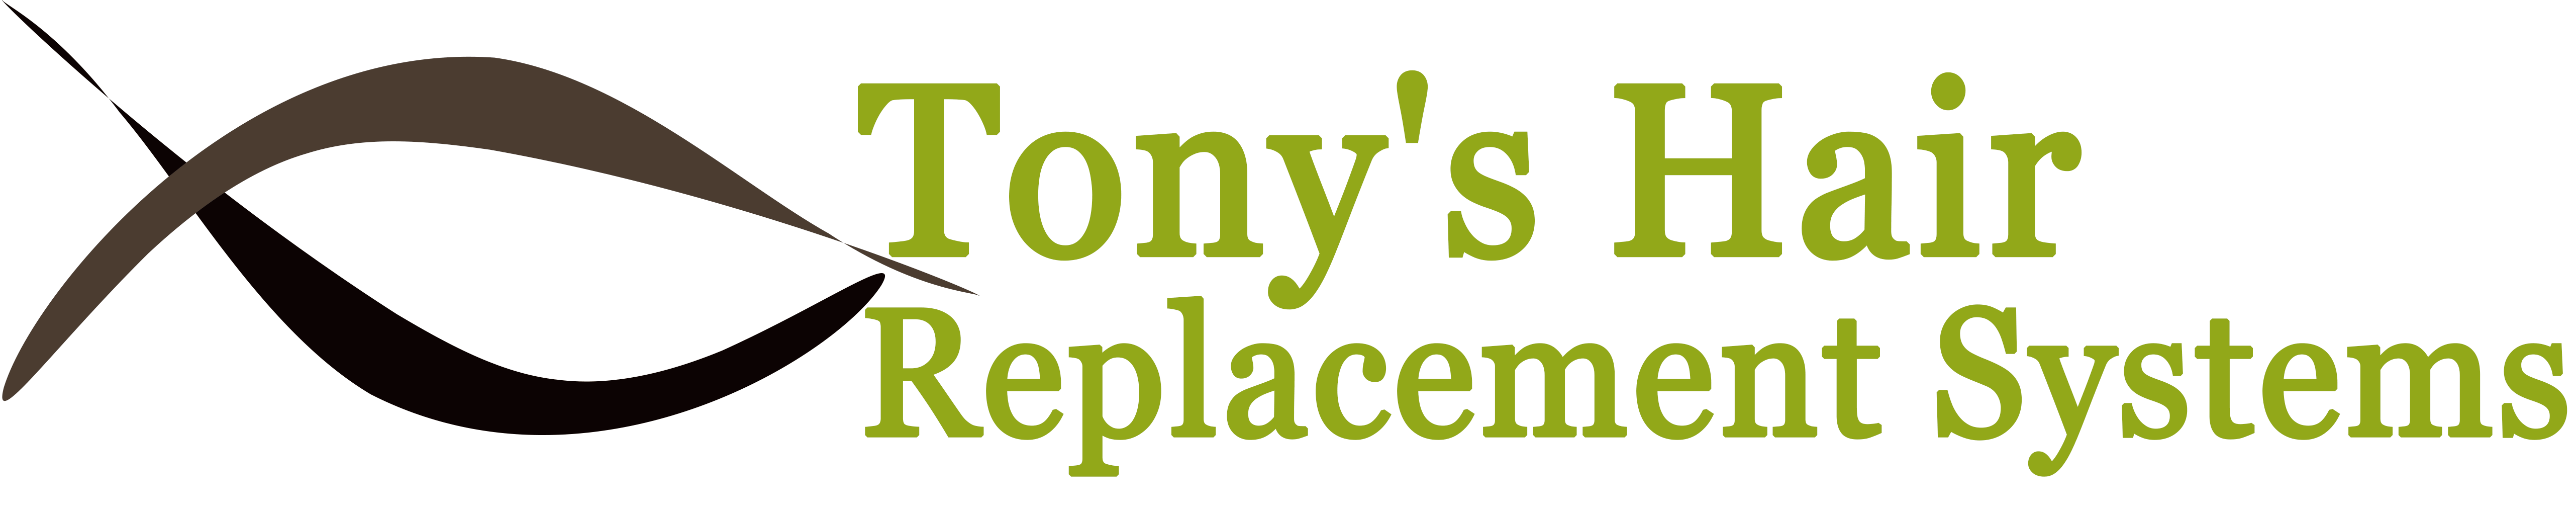 Tony's Hair Replacement Systems